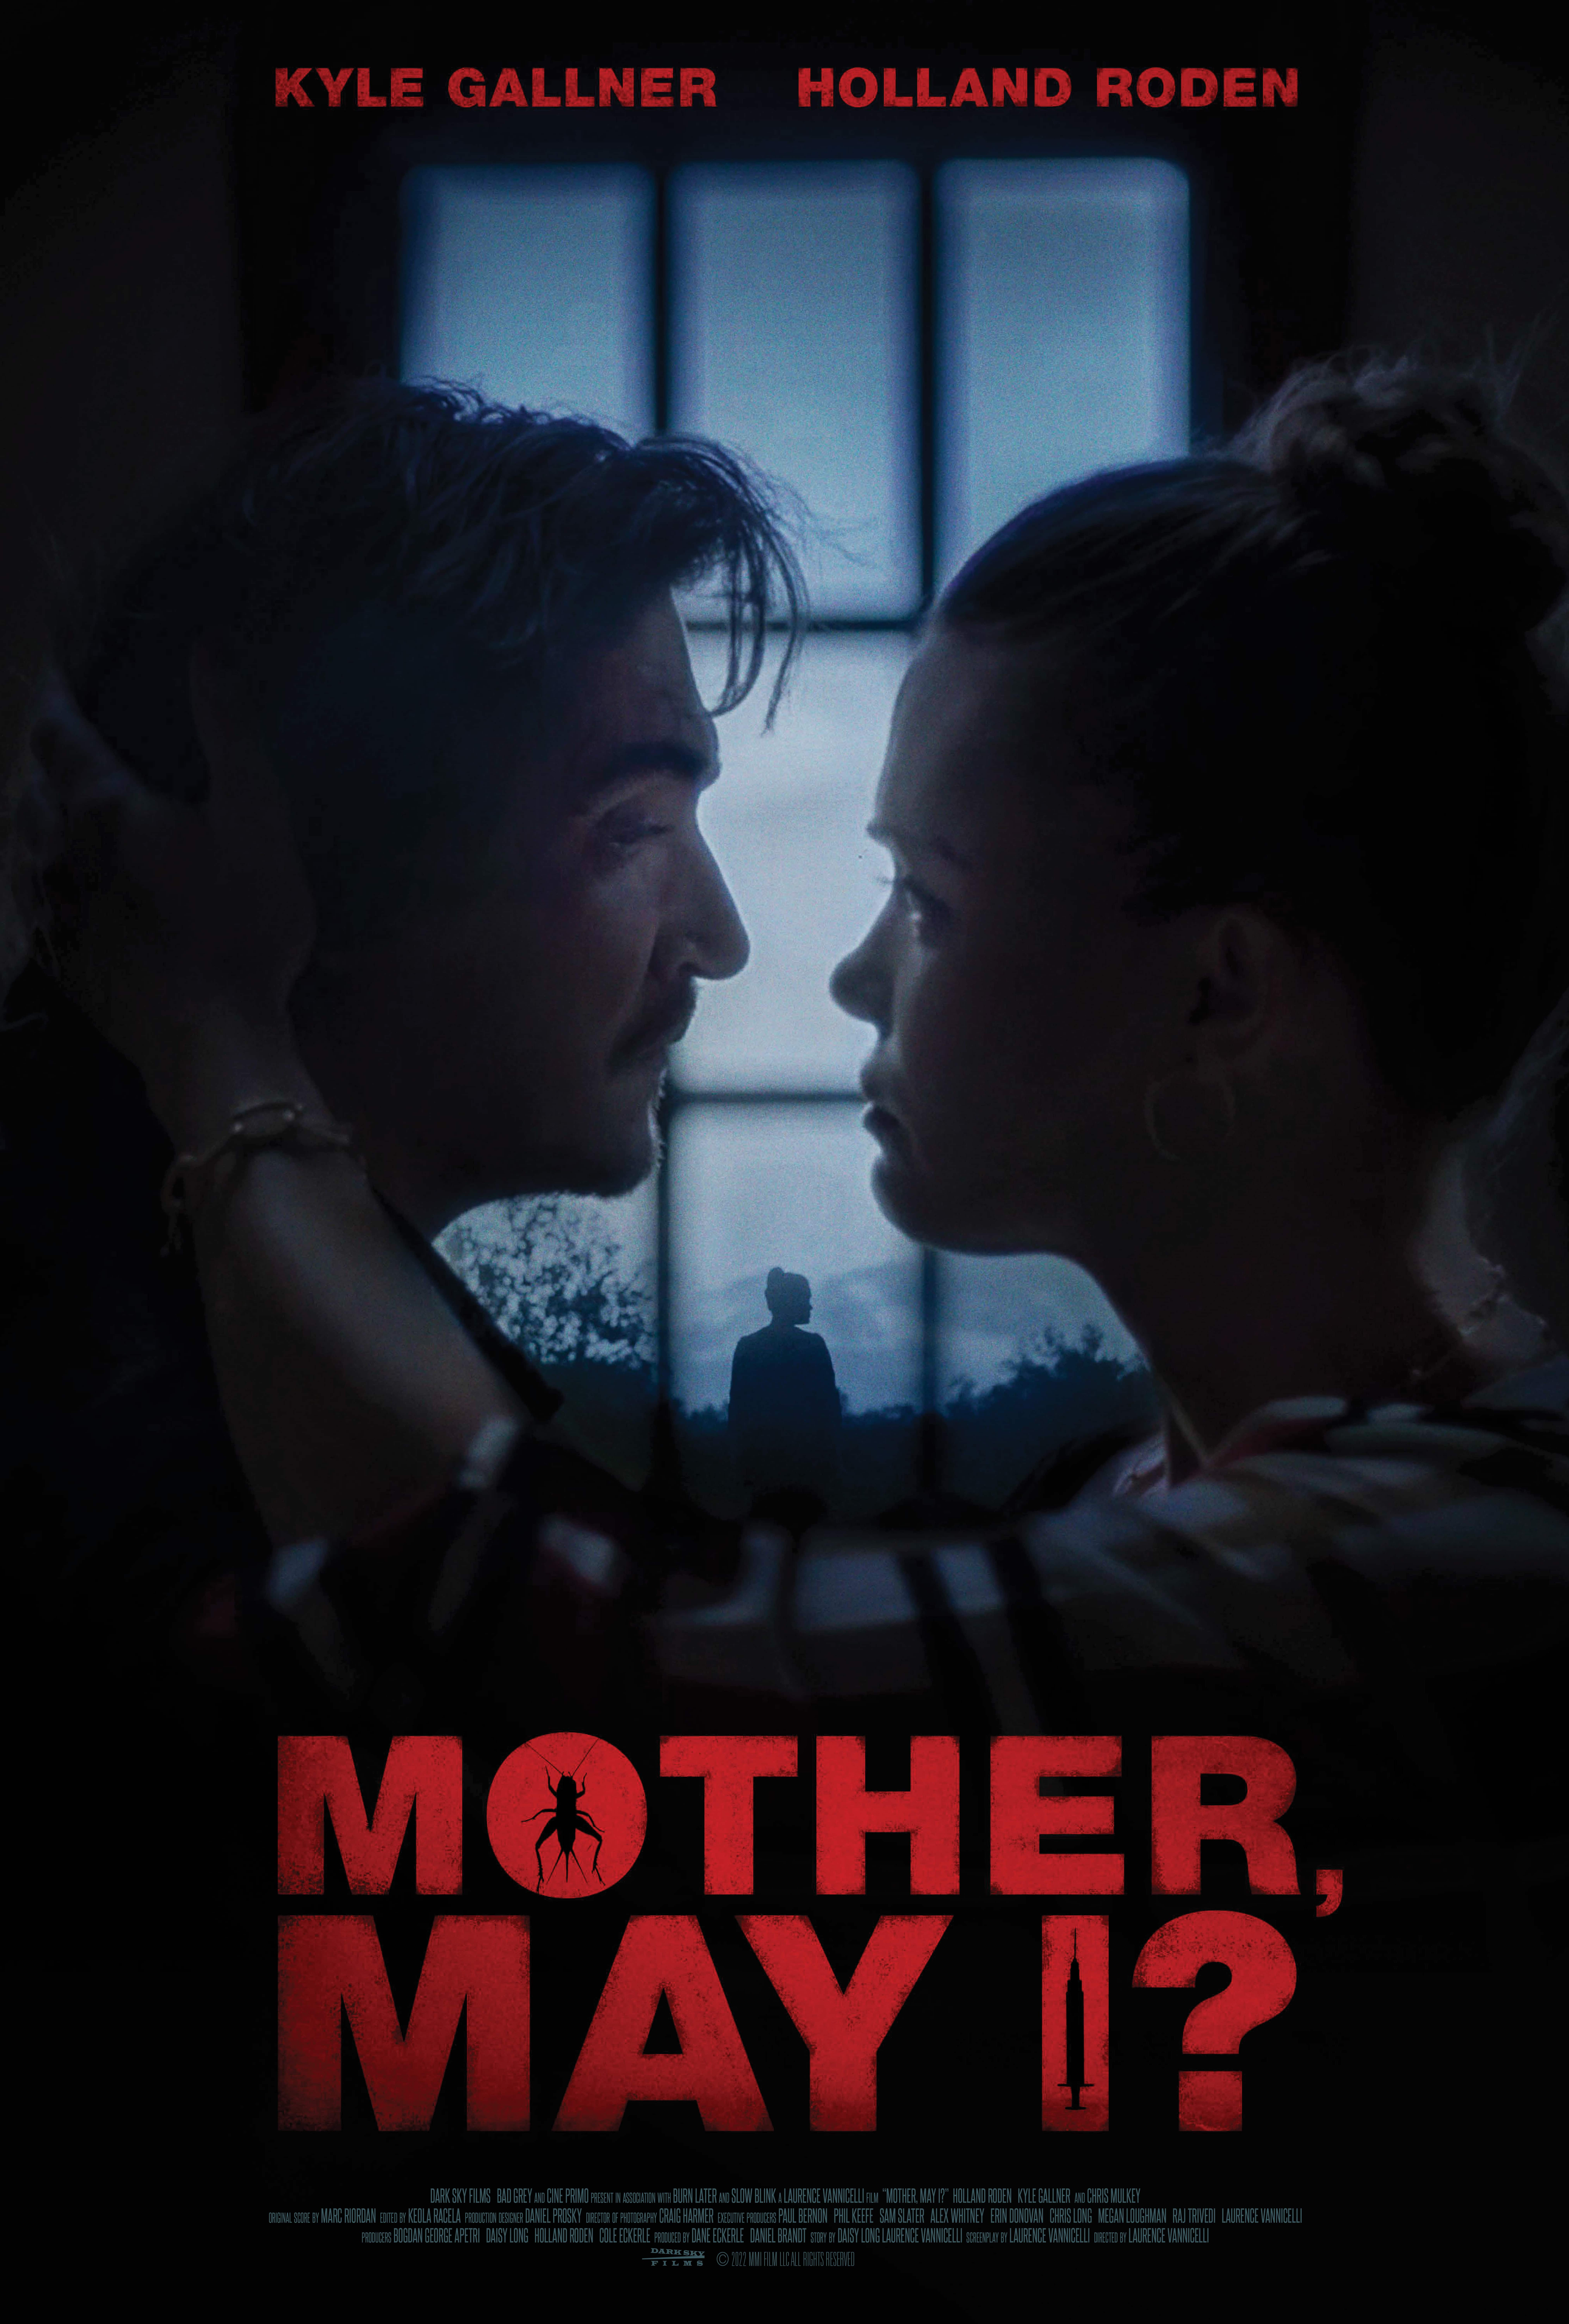 Mother, May I? - A Spine-Chilling Thriller Arriving Soon 23